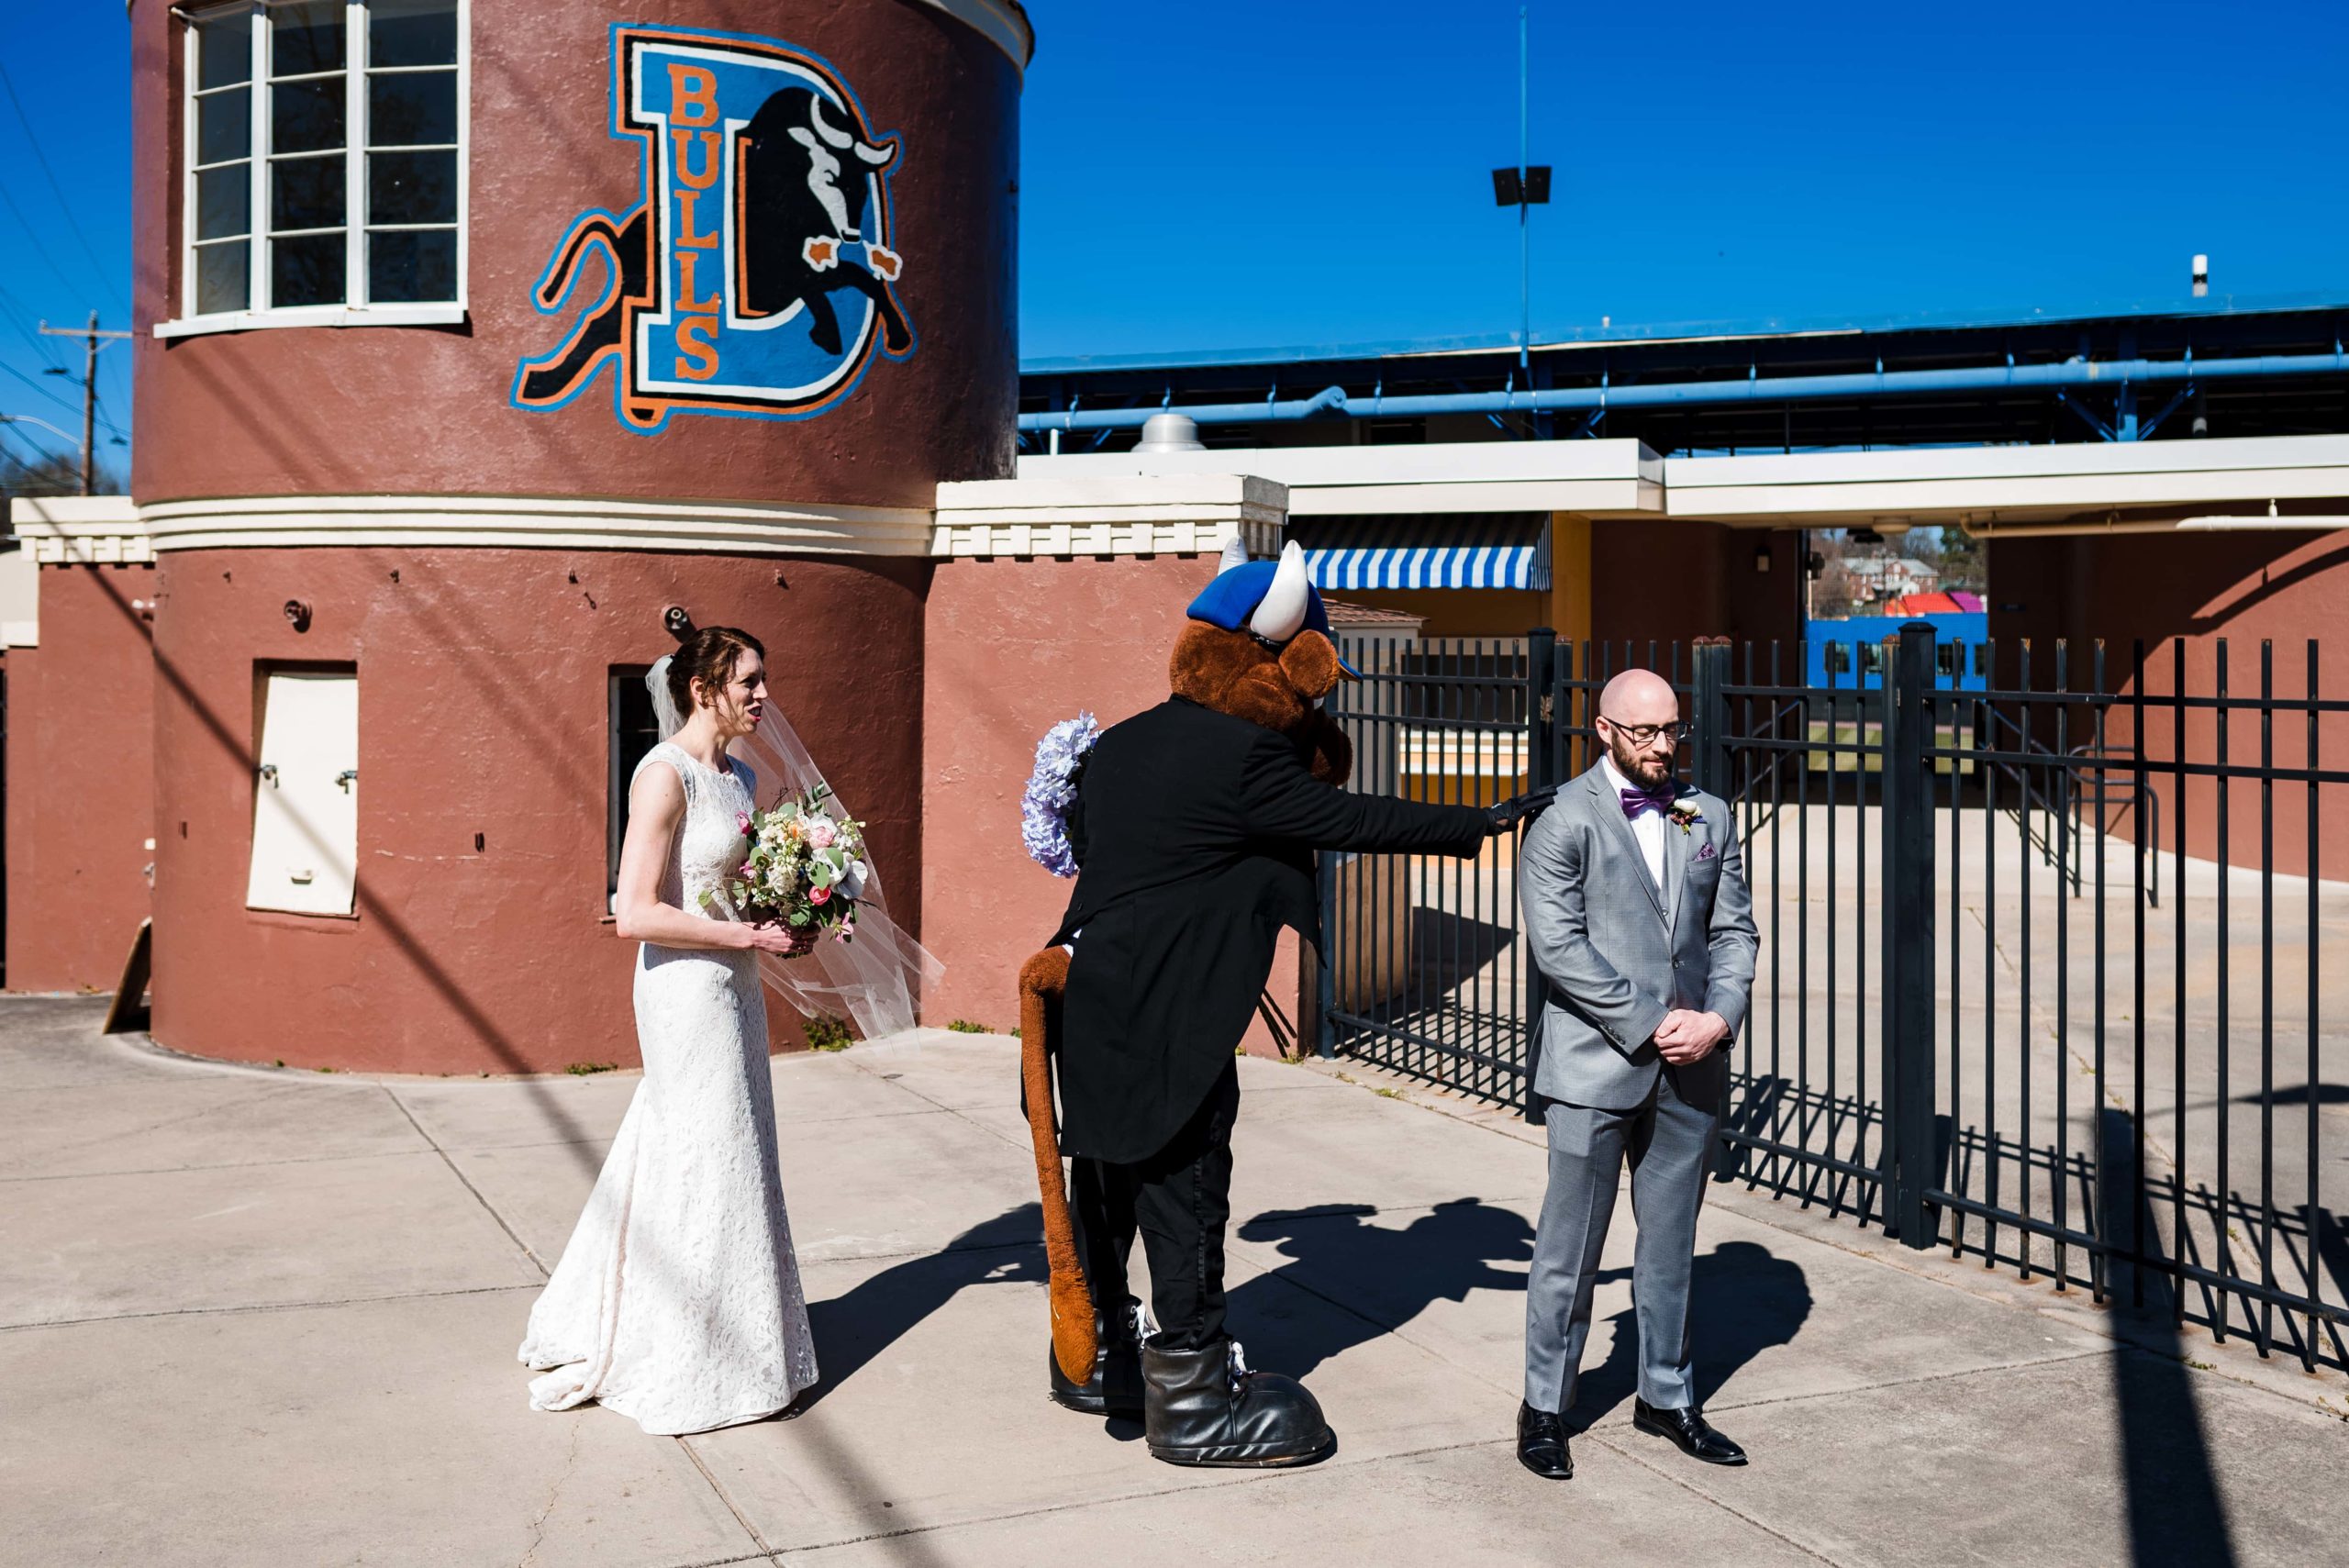 Mascot crashes wedding first look